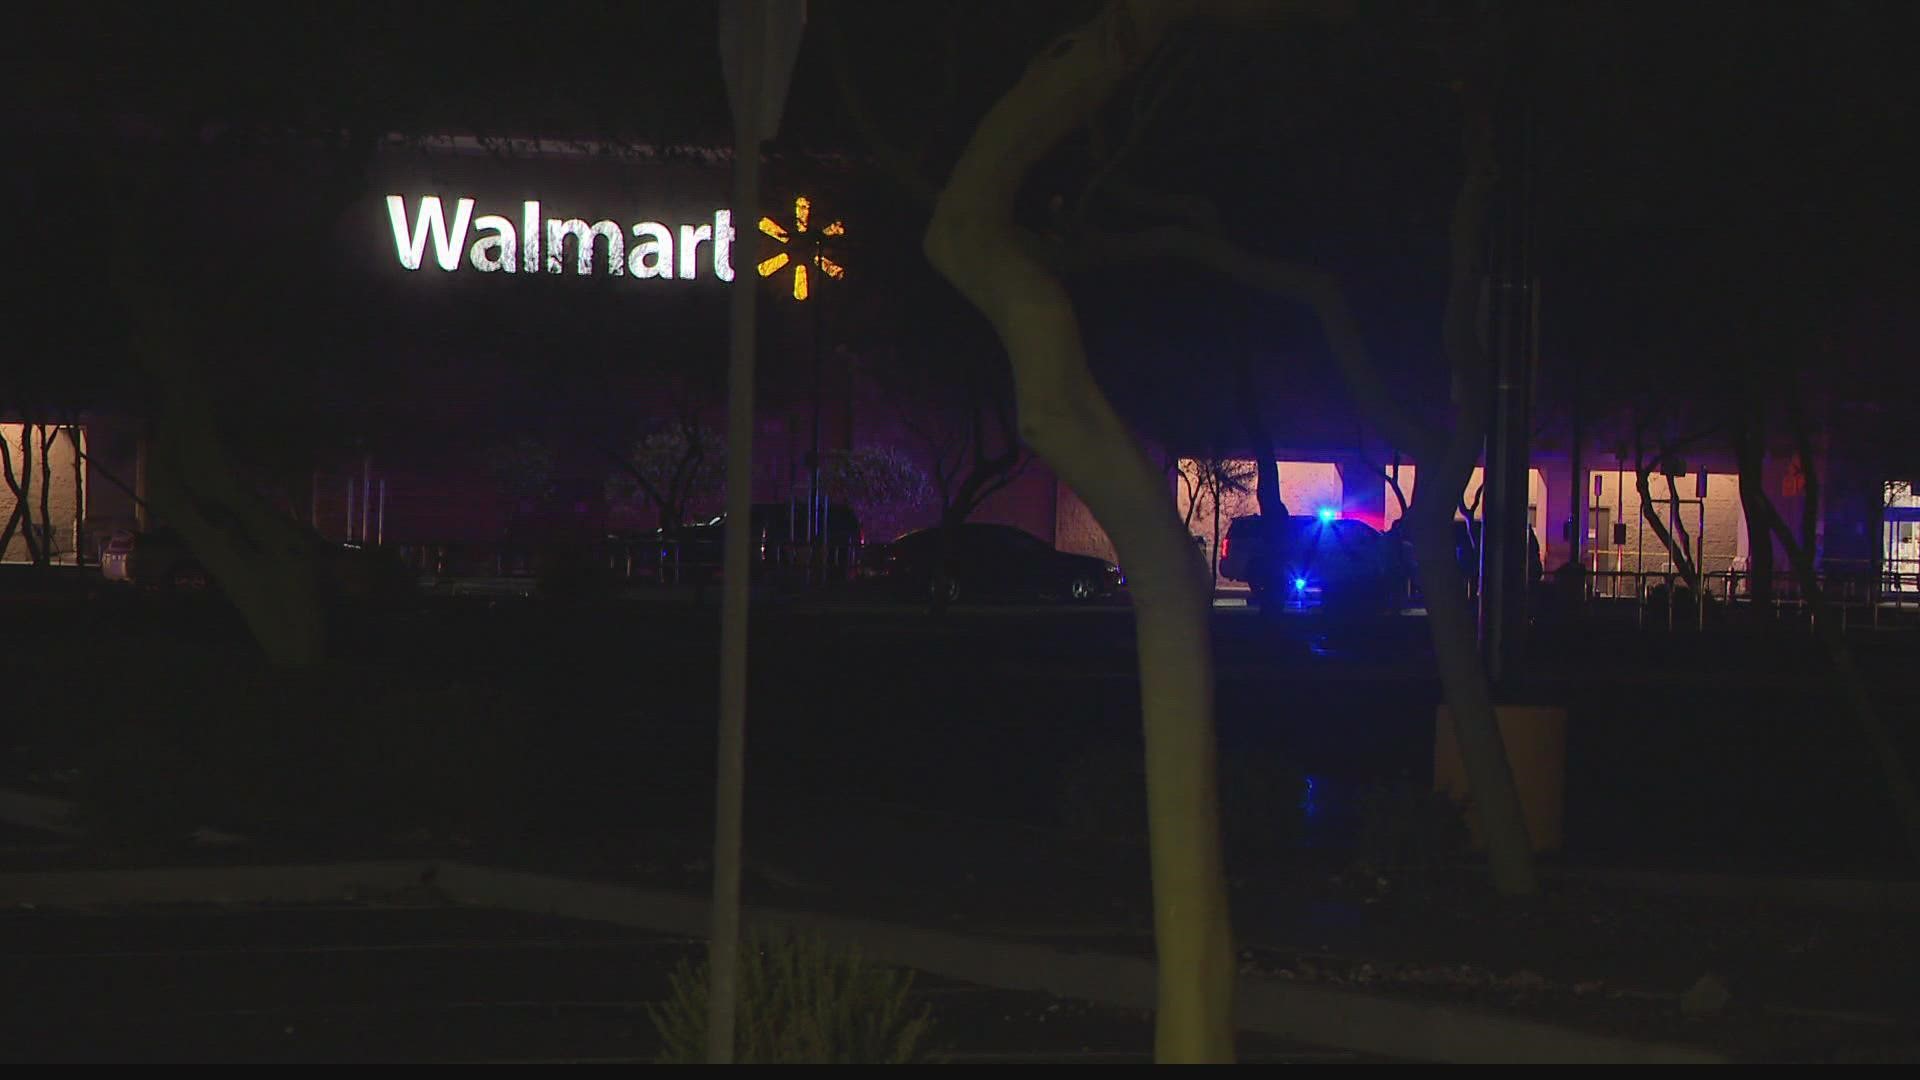 A fight inside a Walmart Supercenter in west Phoenix escalated violently into a shooting that injured a bystander Sunday night.